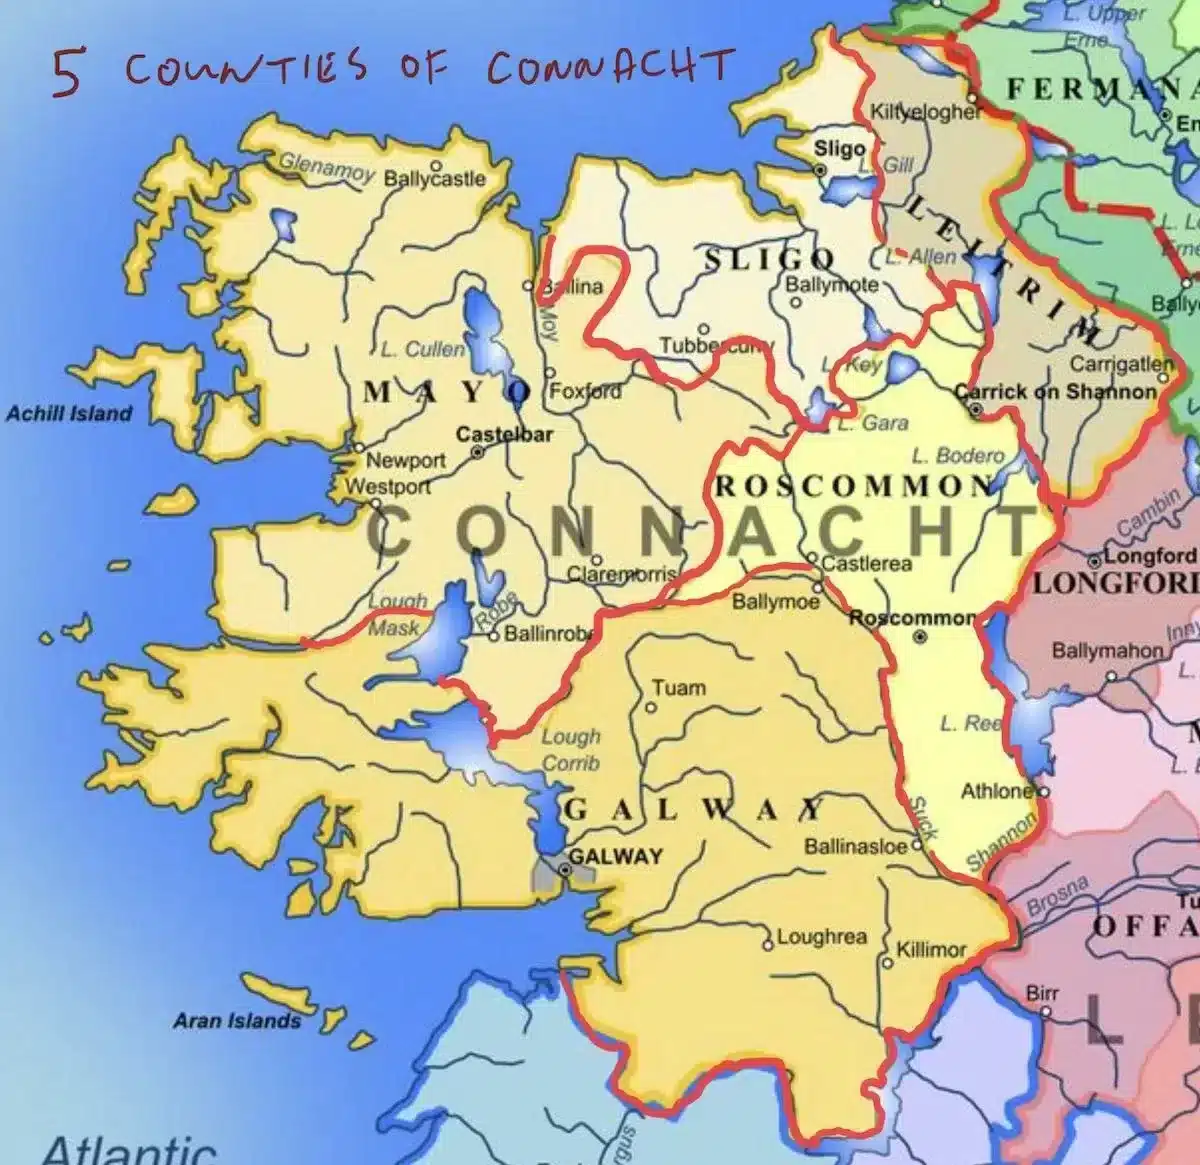 Connaught music and counties